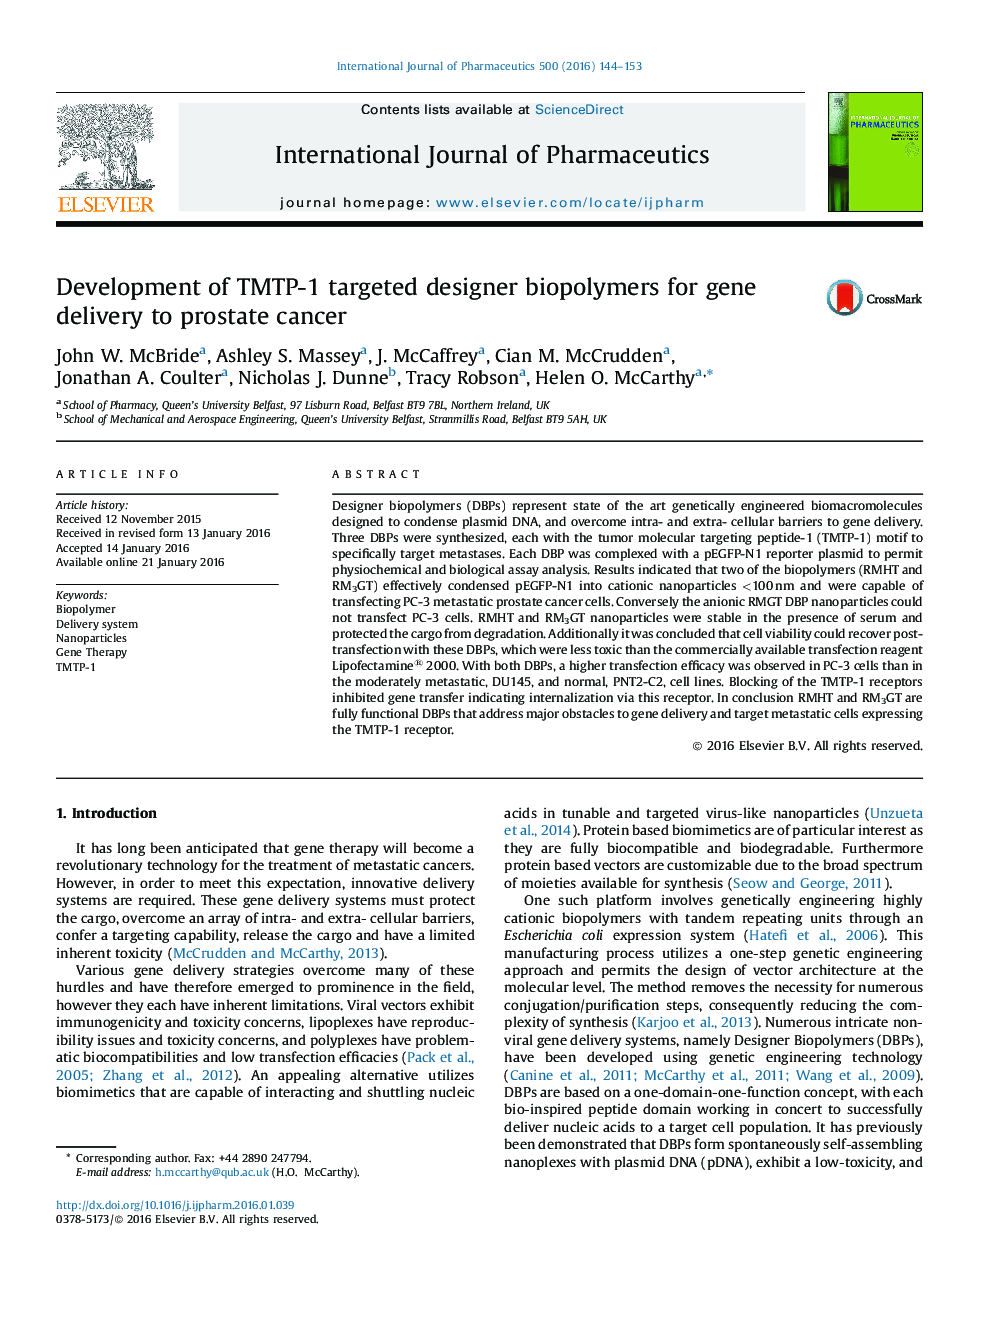 Development of TMTP-1 targeted designer biopolymers for gene delivery to prostate cancer